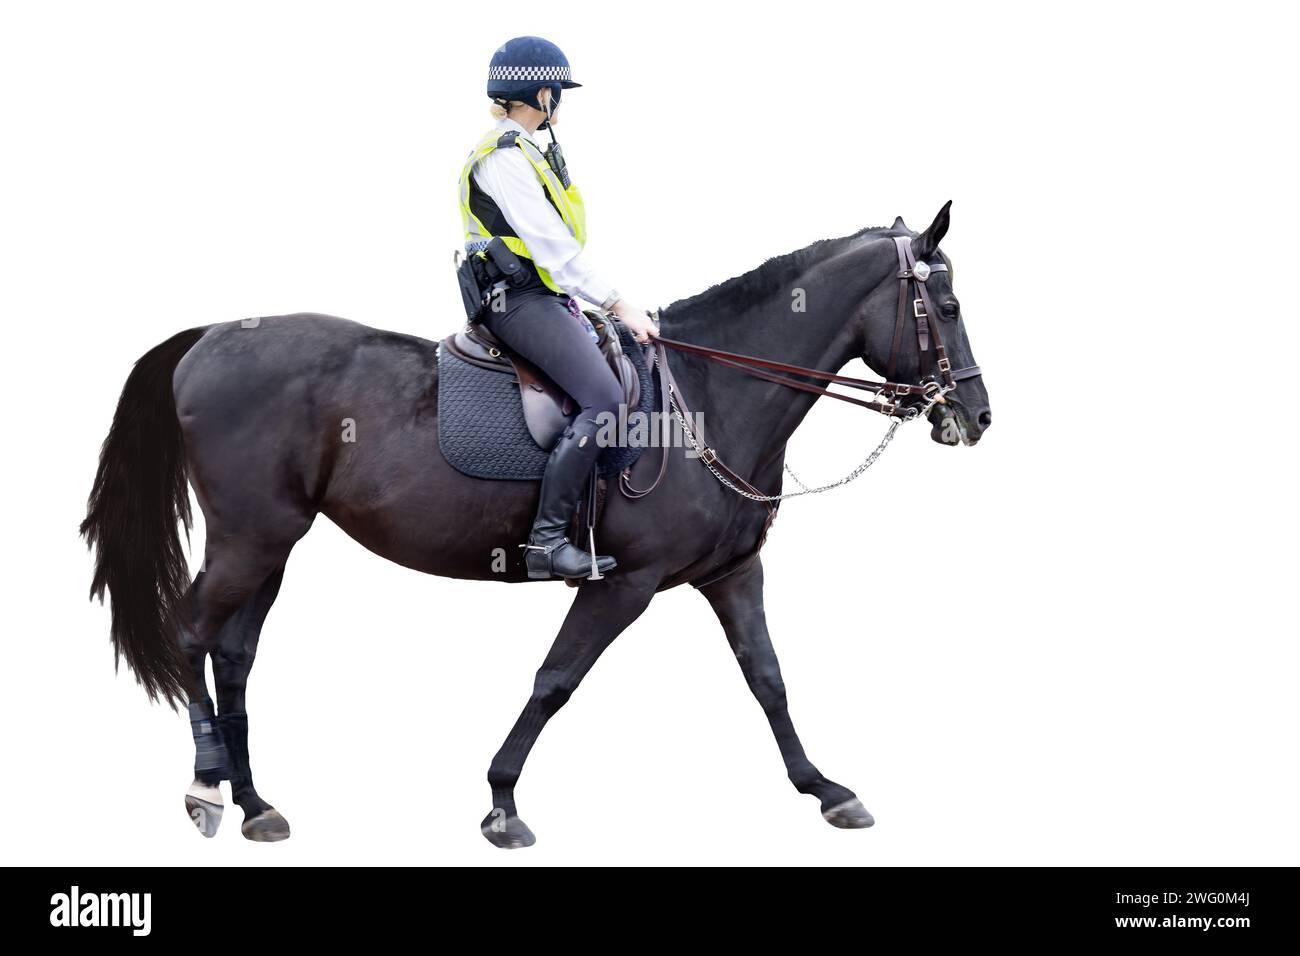 Unidentified London Metropolitan police woman officer riding a black horse is on duty, isolated on white background with space for text Stock Photo